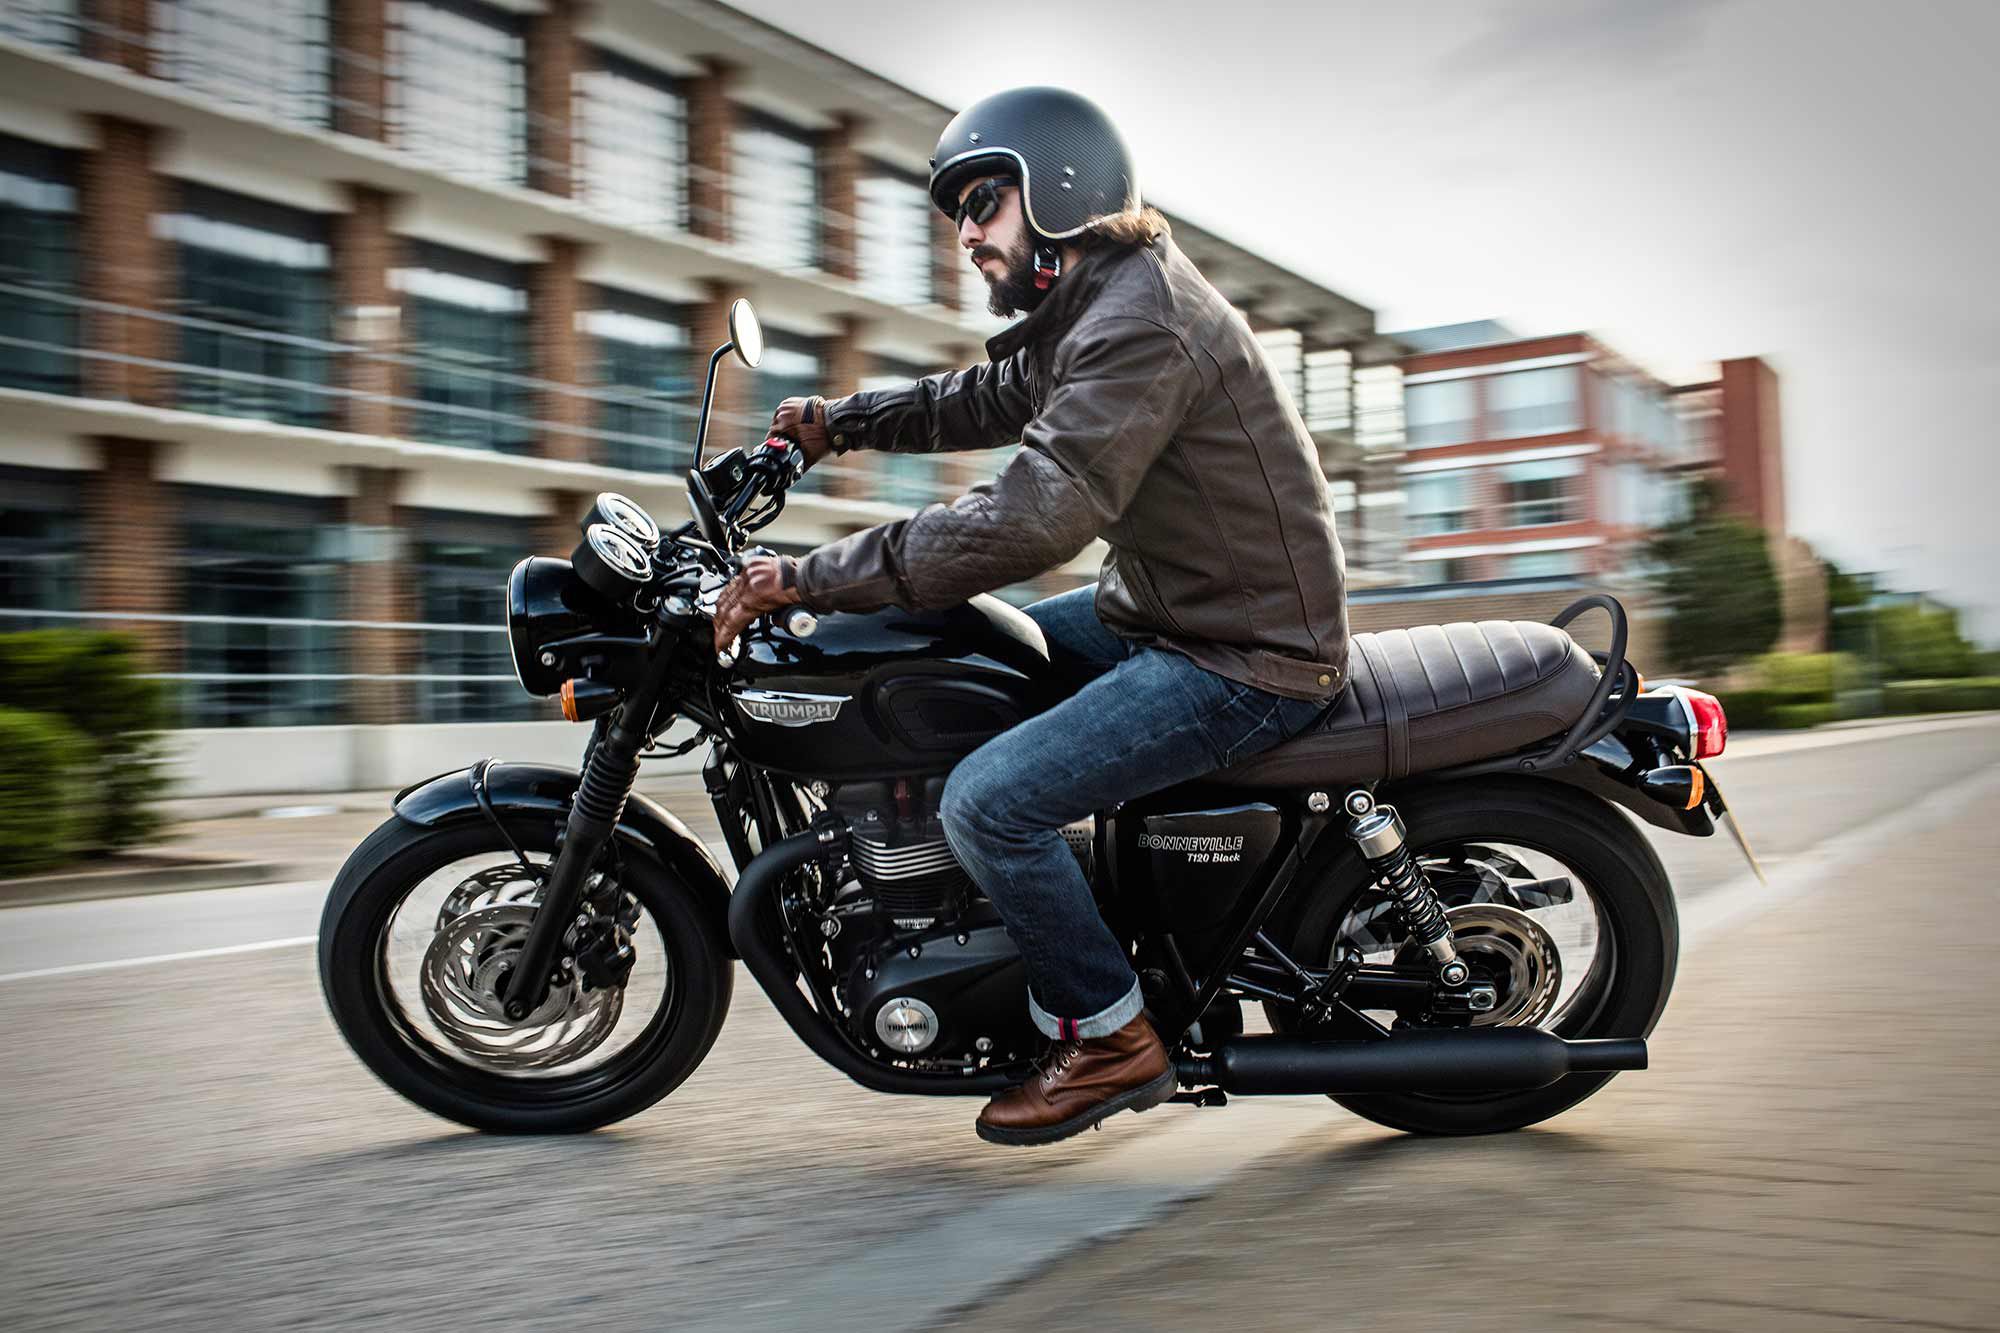 The Triumph Bonneville T120 has enough power to easily handle two-up duty.